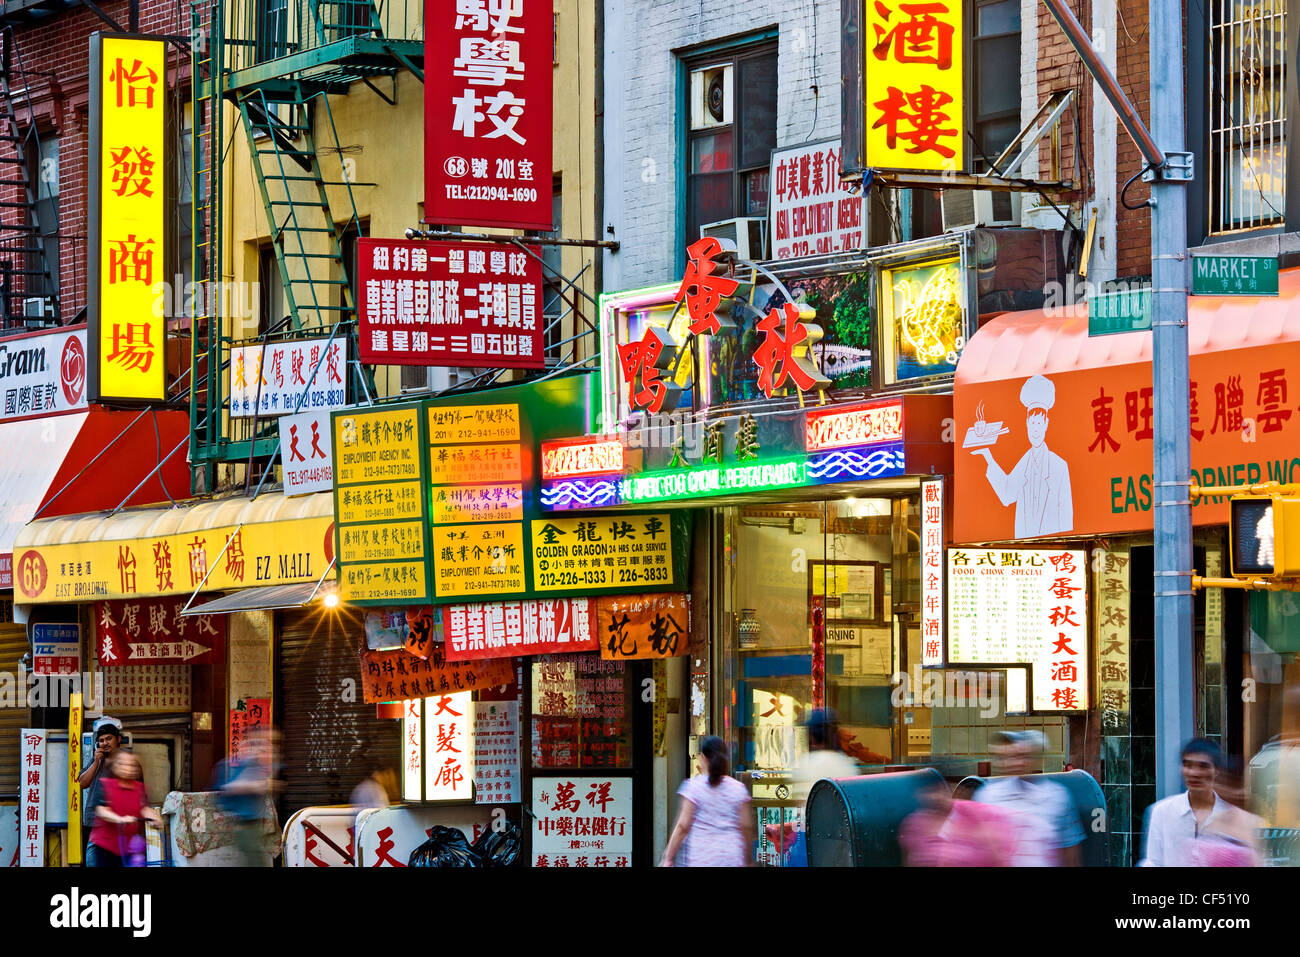 East Broadway in Chinatown, New York City, displays colorful signs for Chinese businesses. Stock Photo